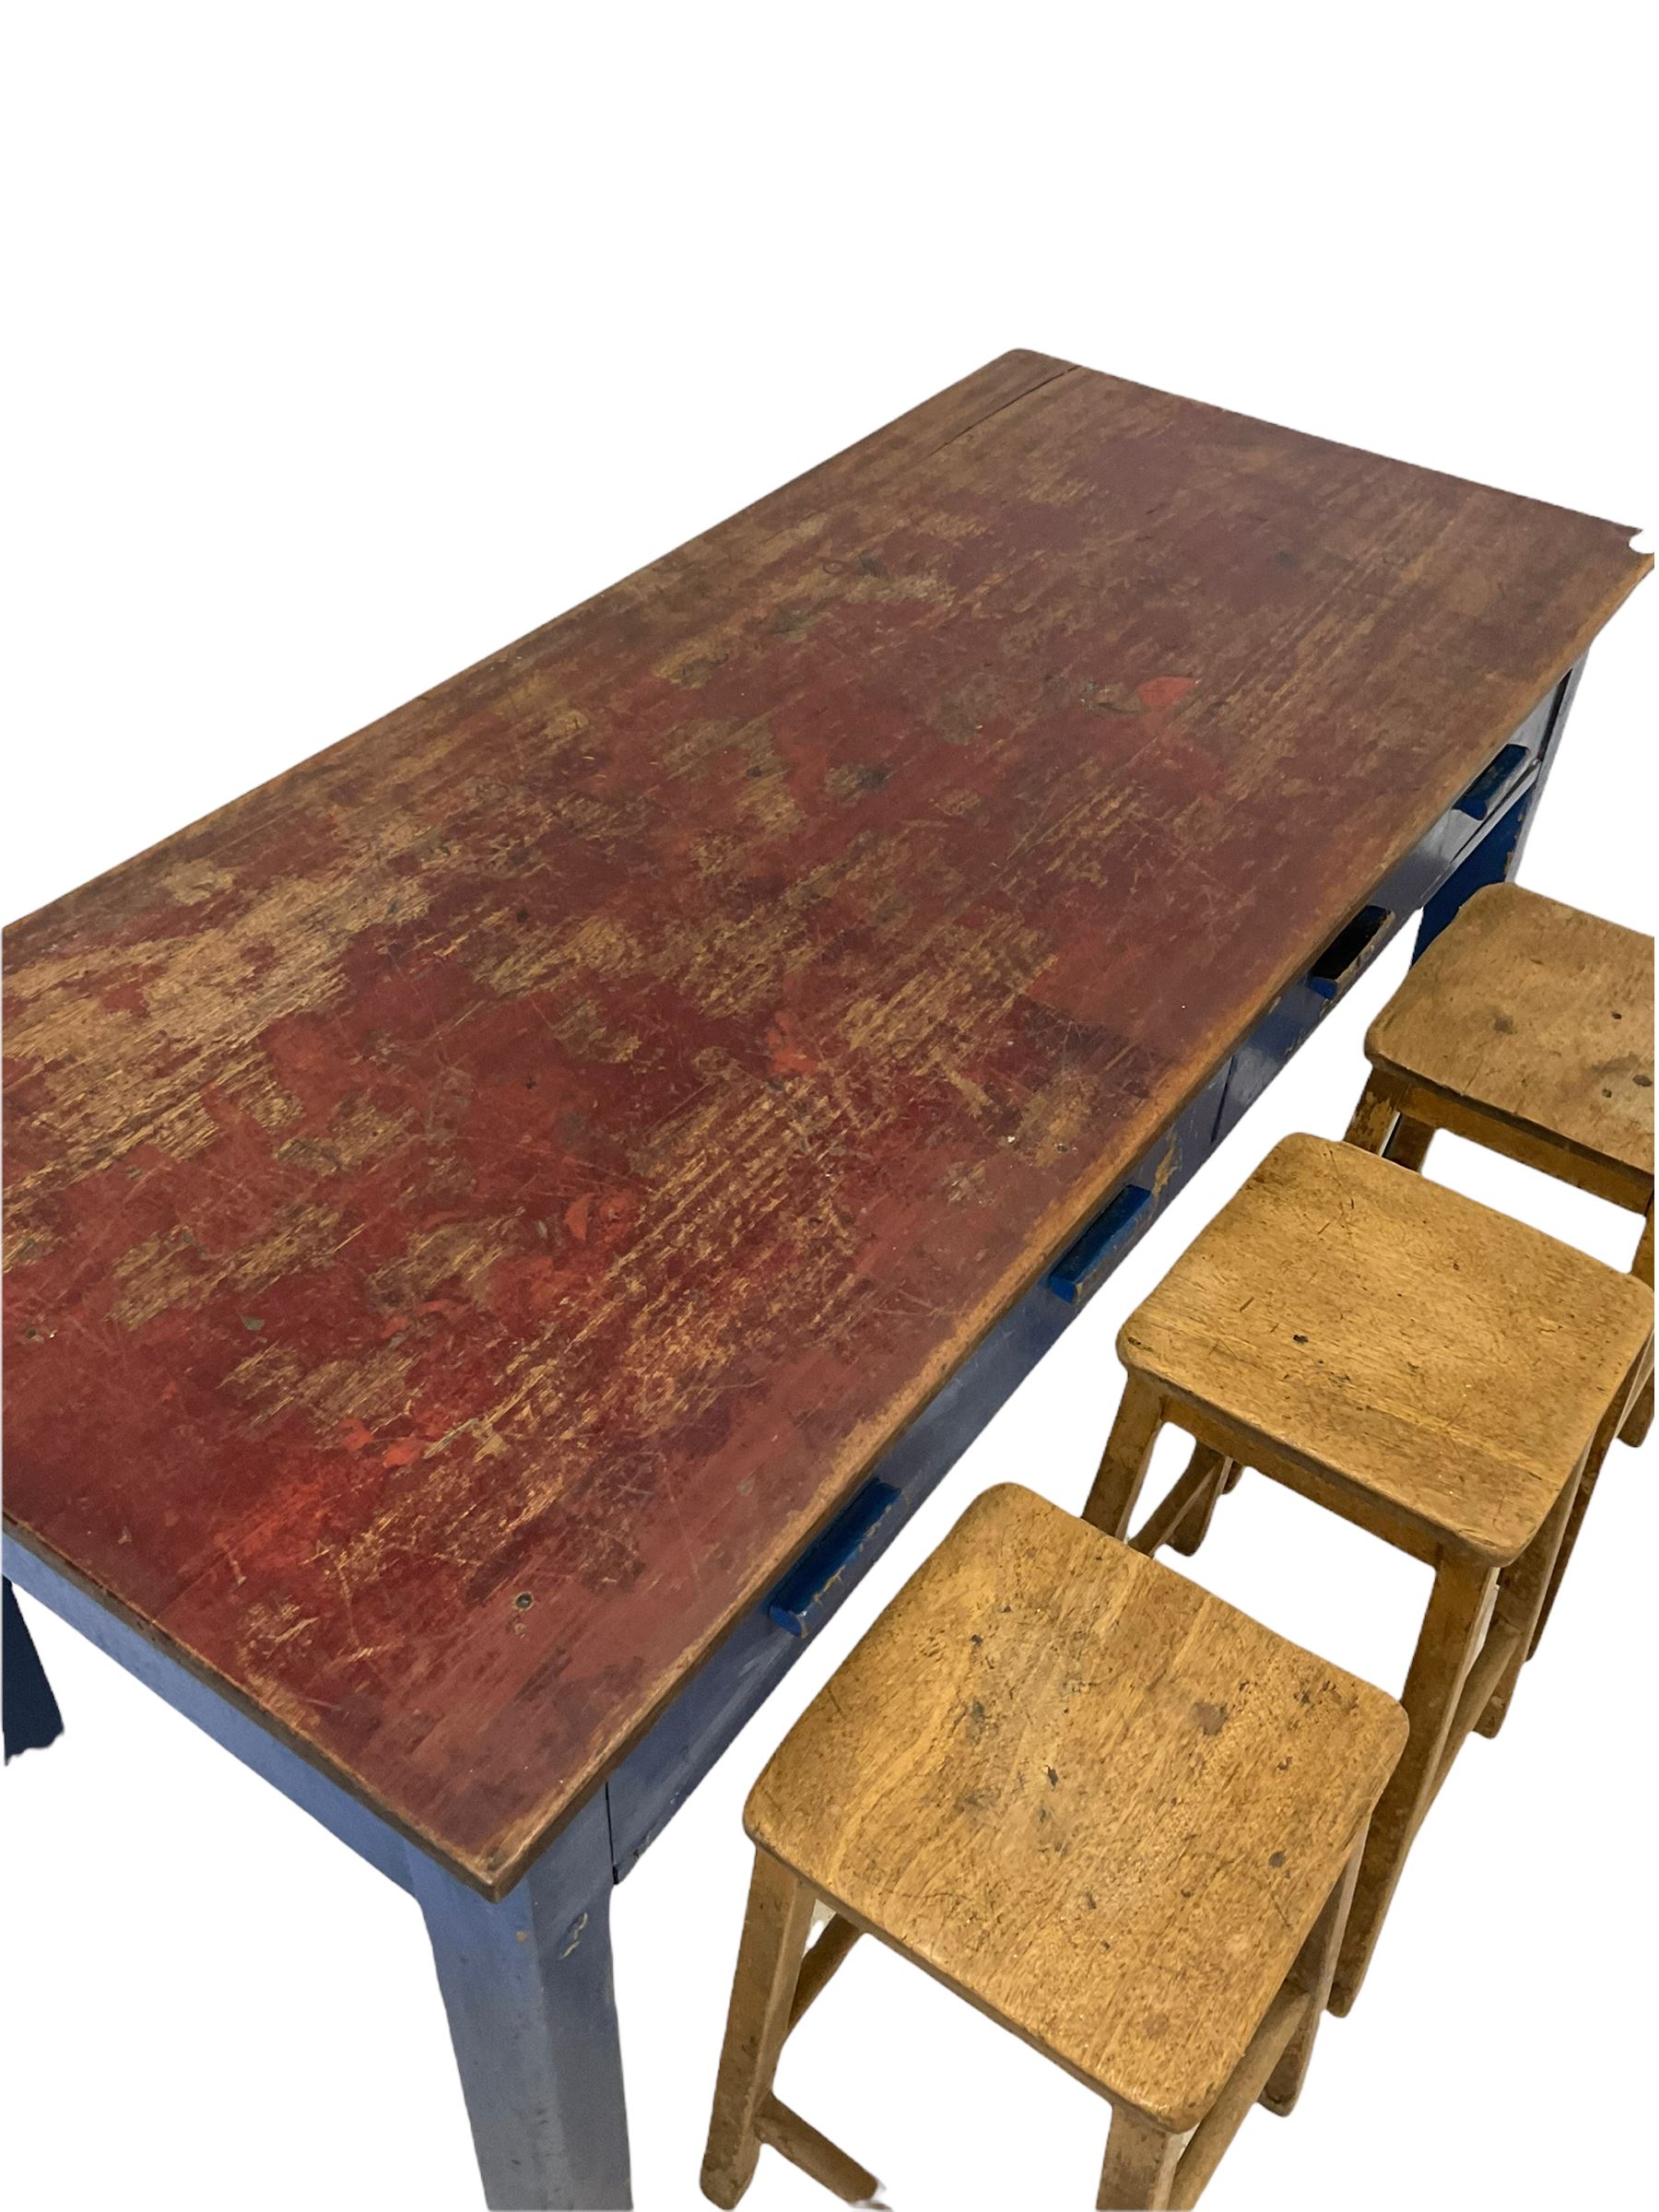 Early to mid 20th century hardwood school laboratory table - Image 3 of 4